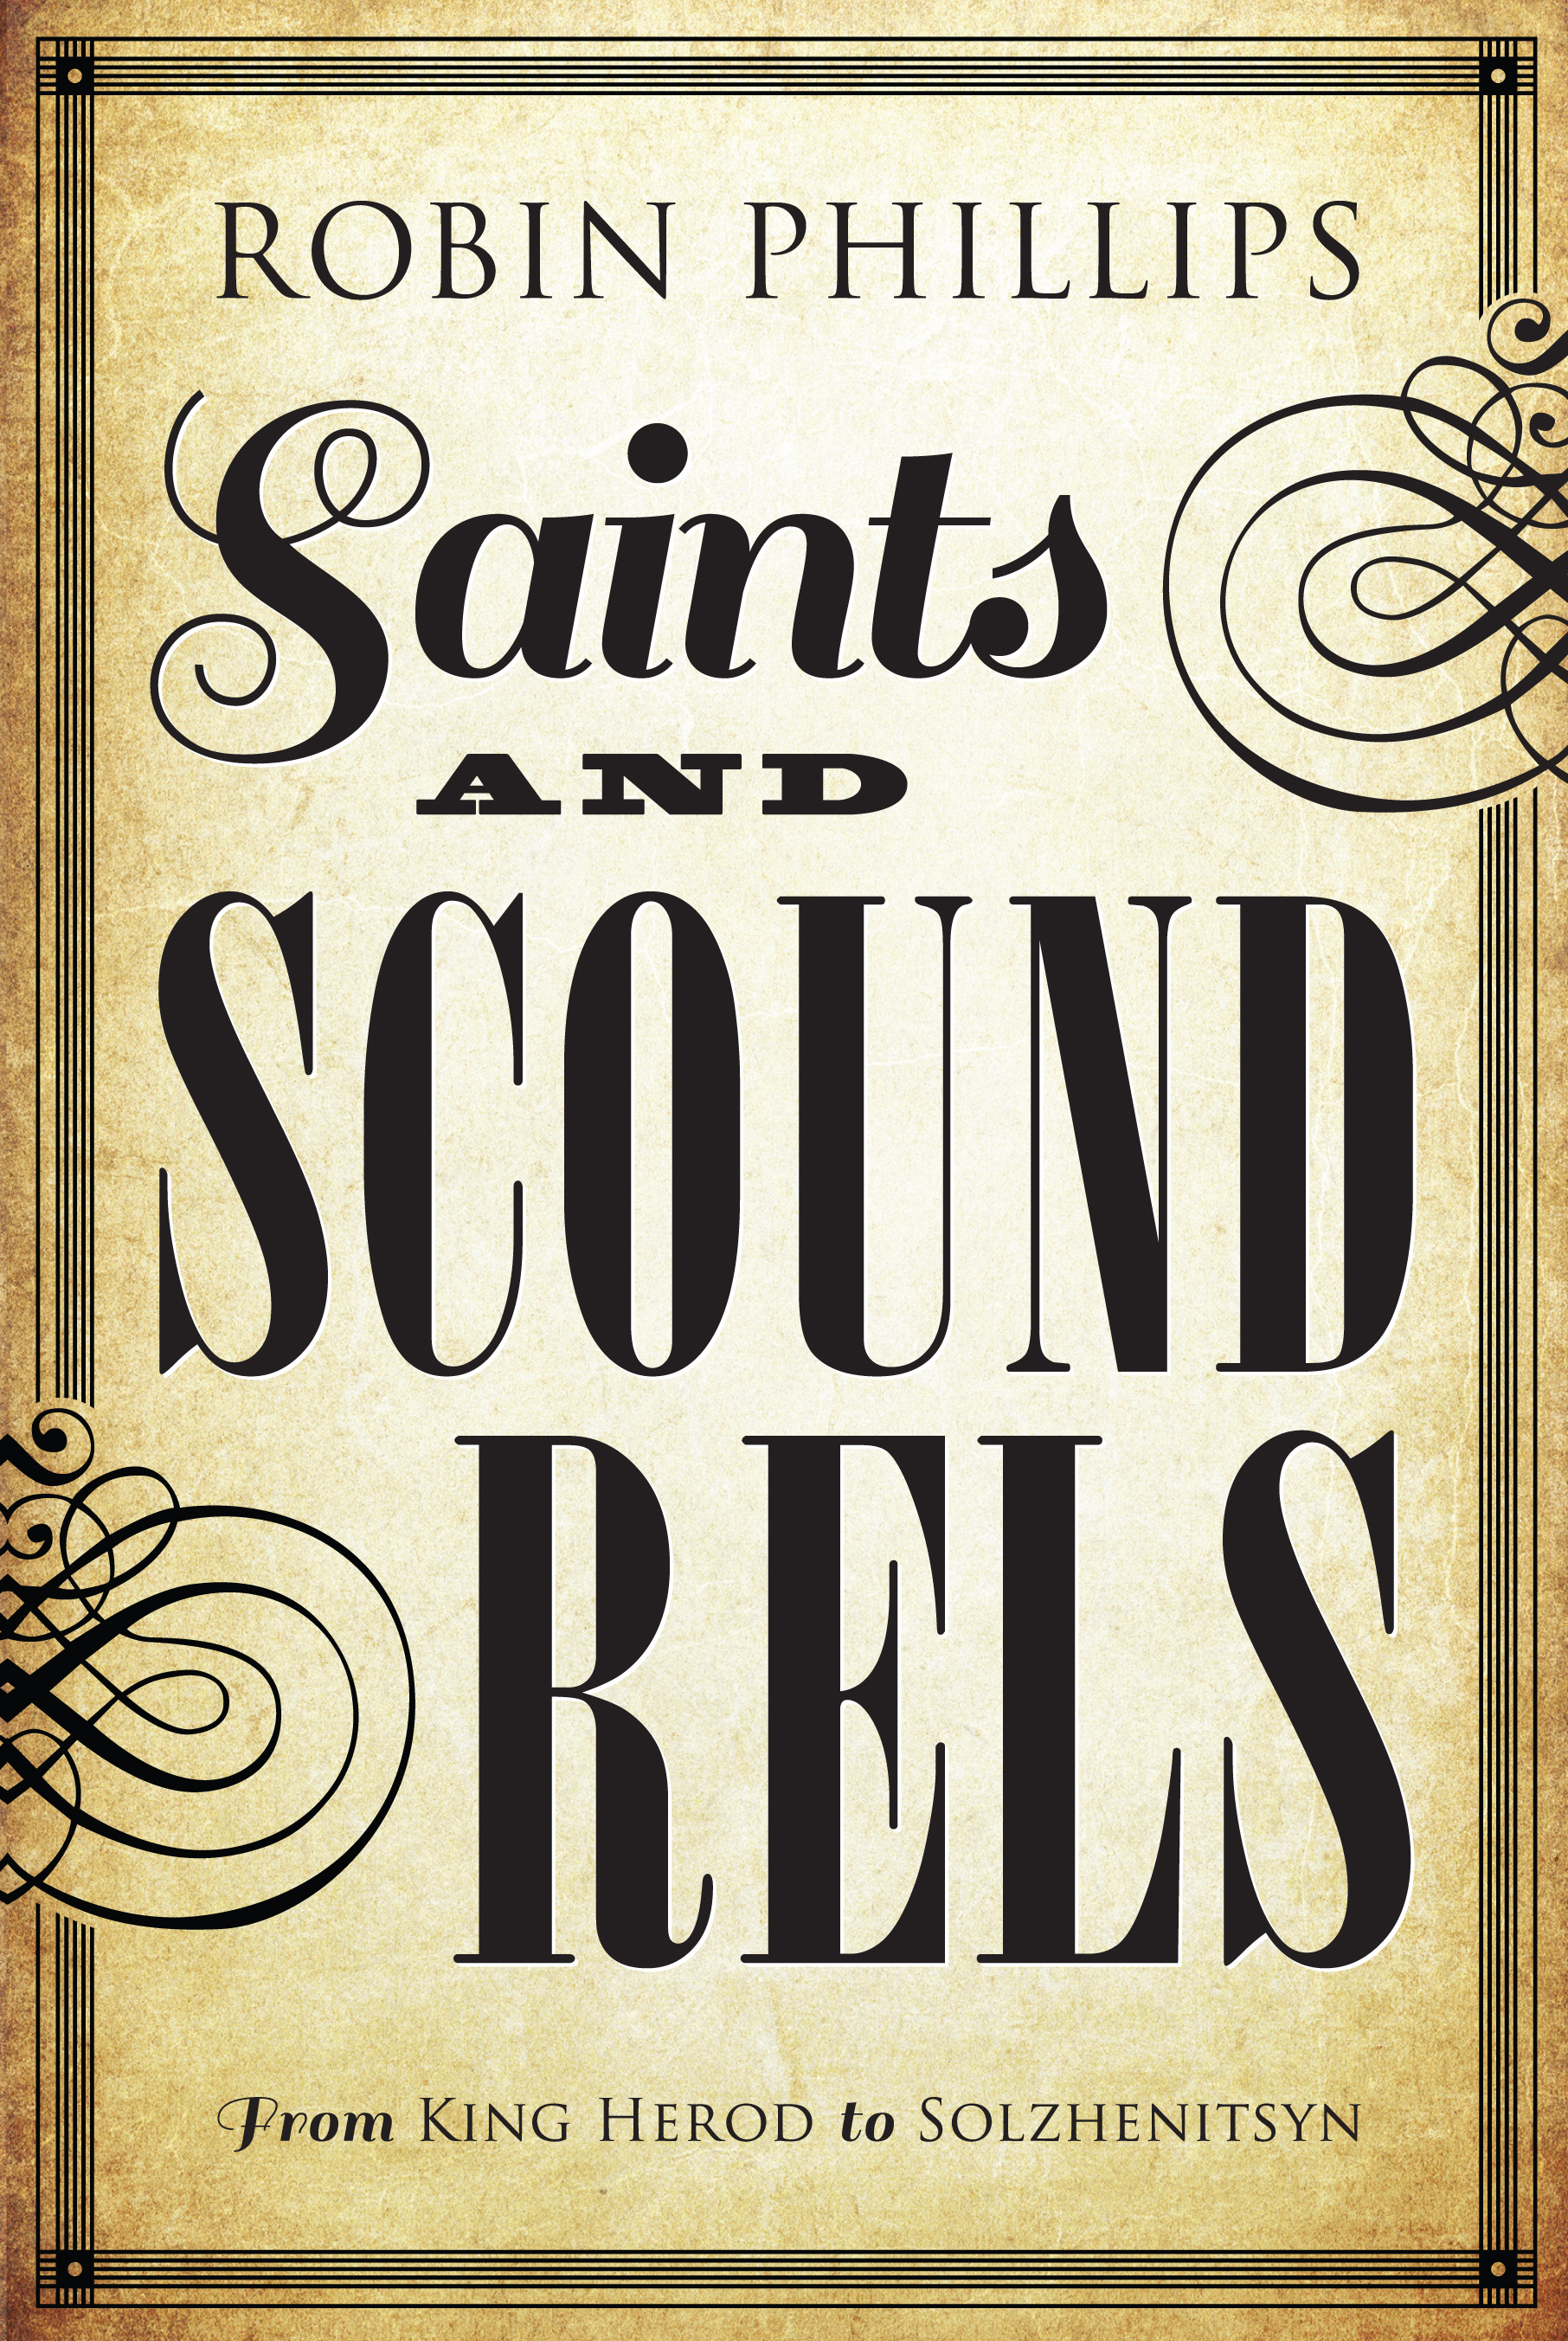 Saints and Scoundrels by Robin Phillips